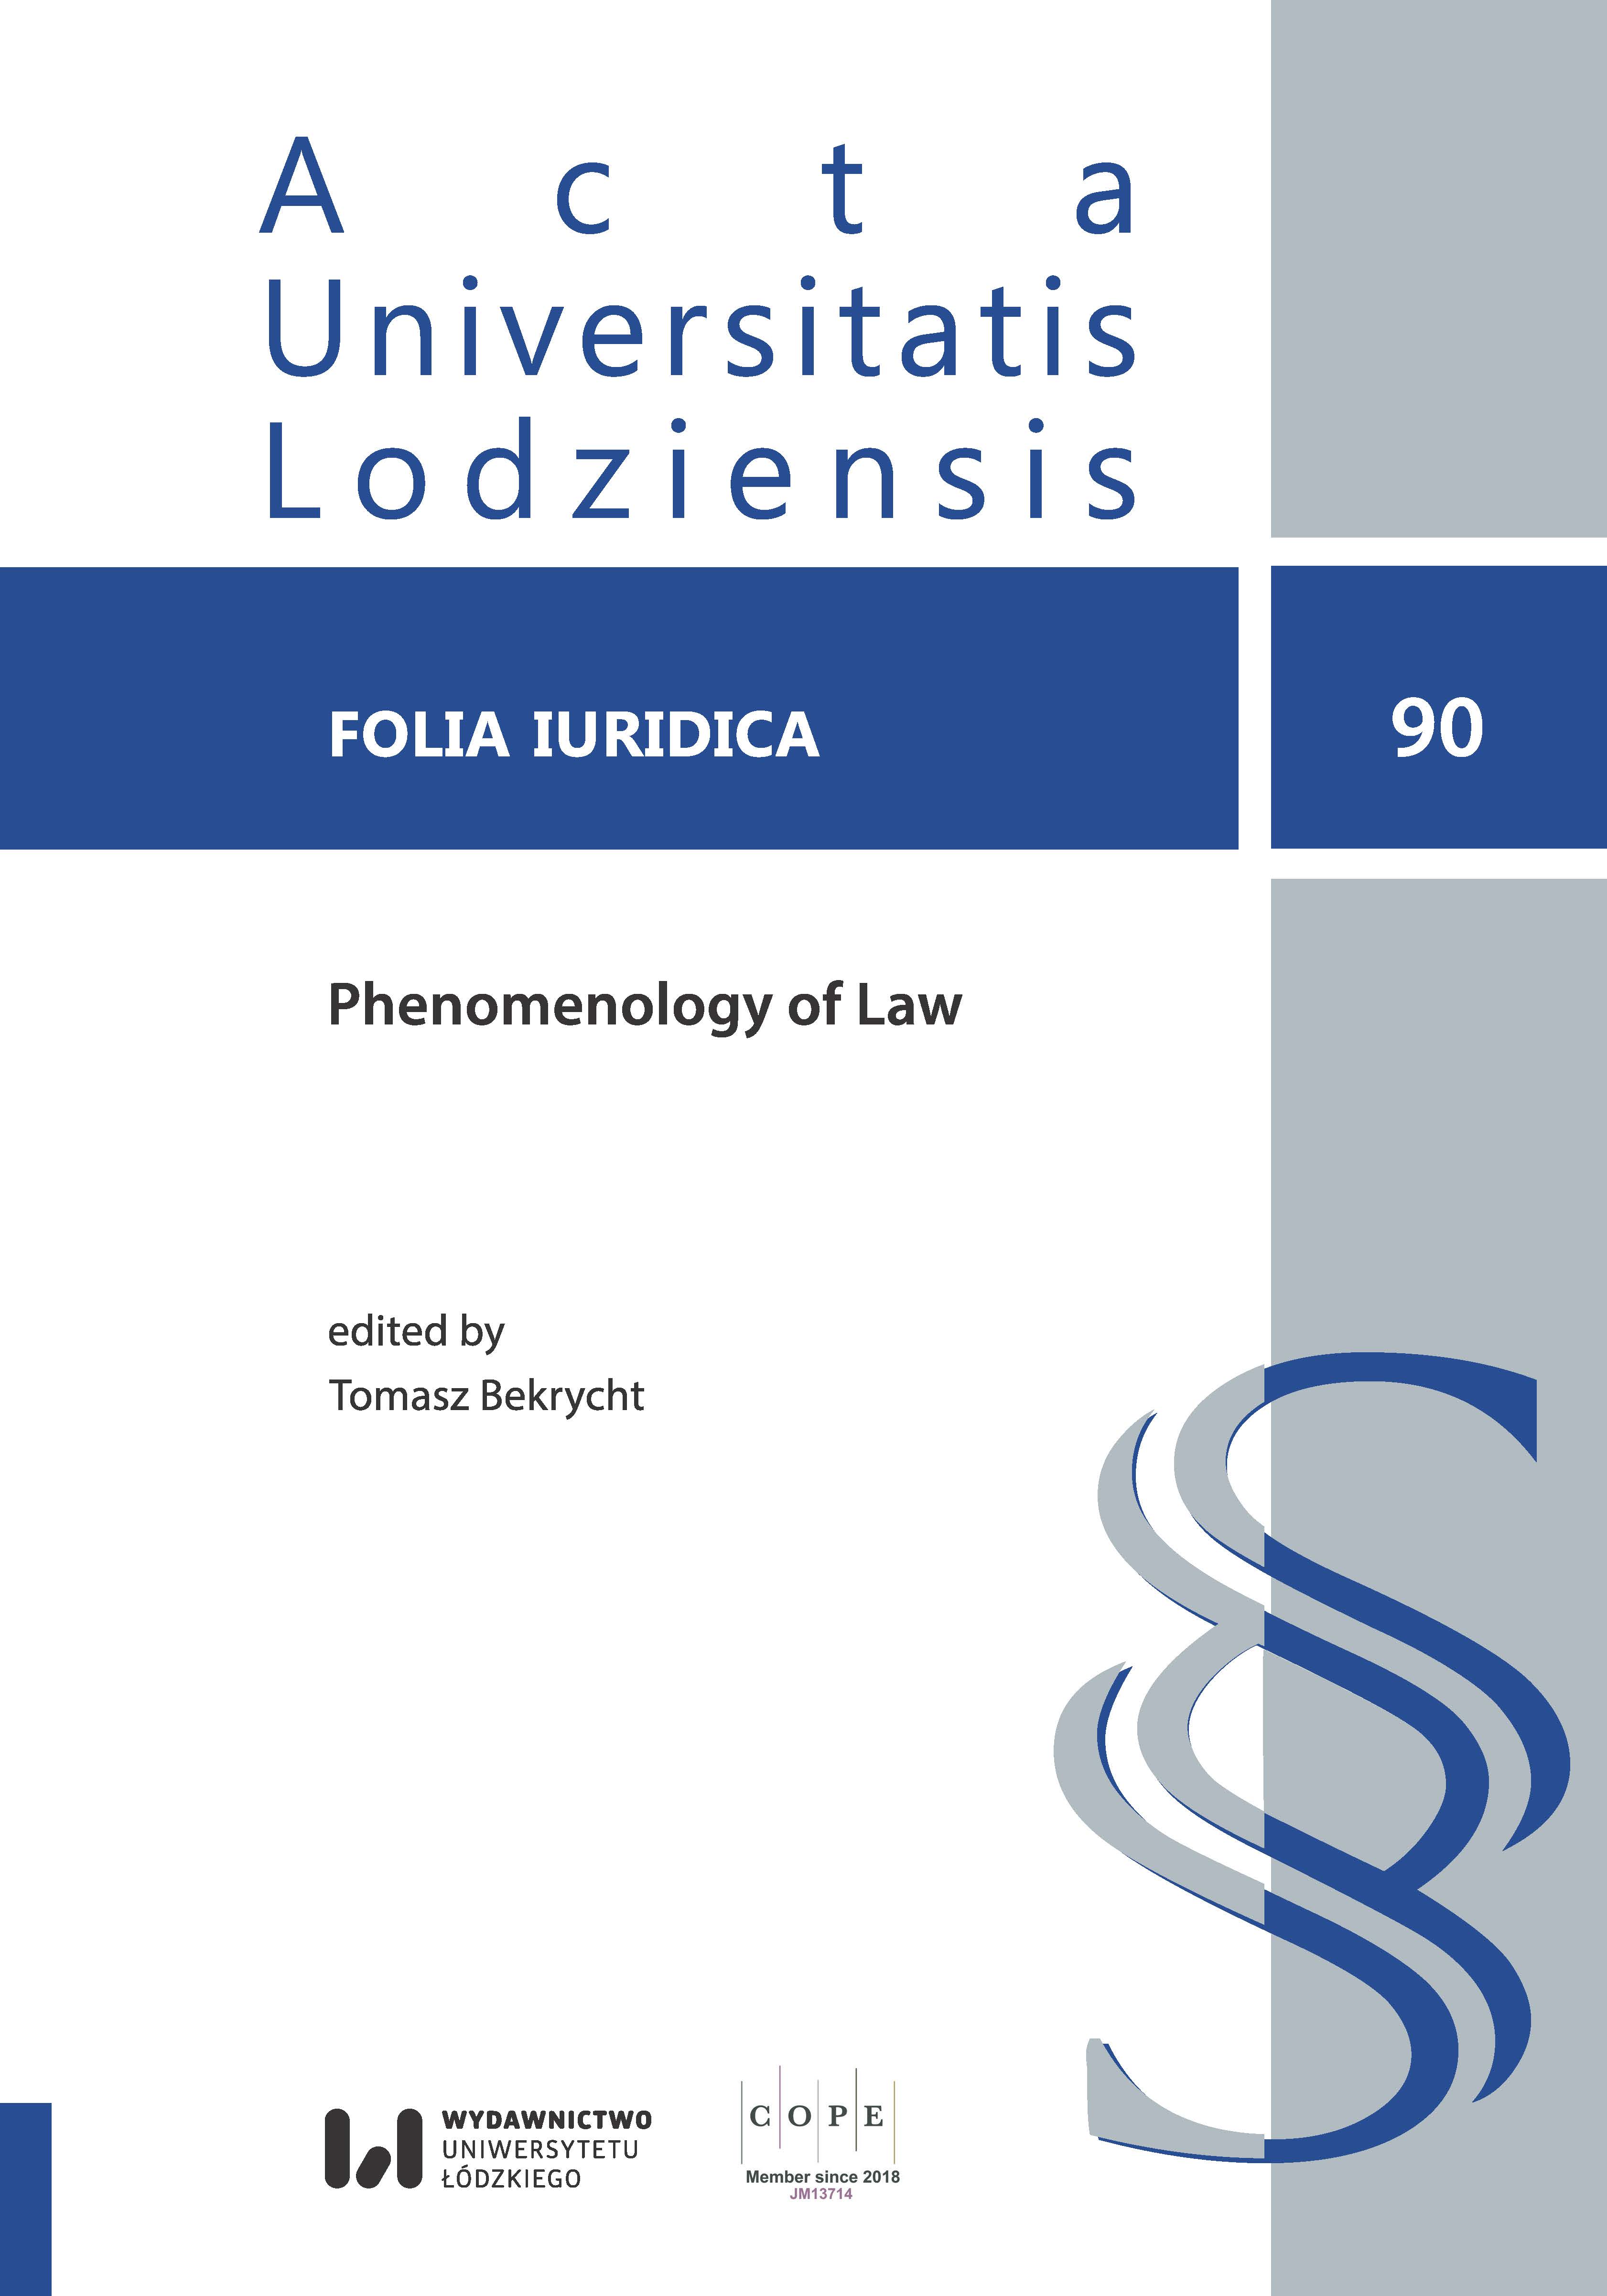 Phenomenological Concept of Law from the Perspective of Carlos Cossio Cover Image